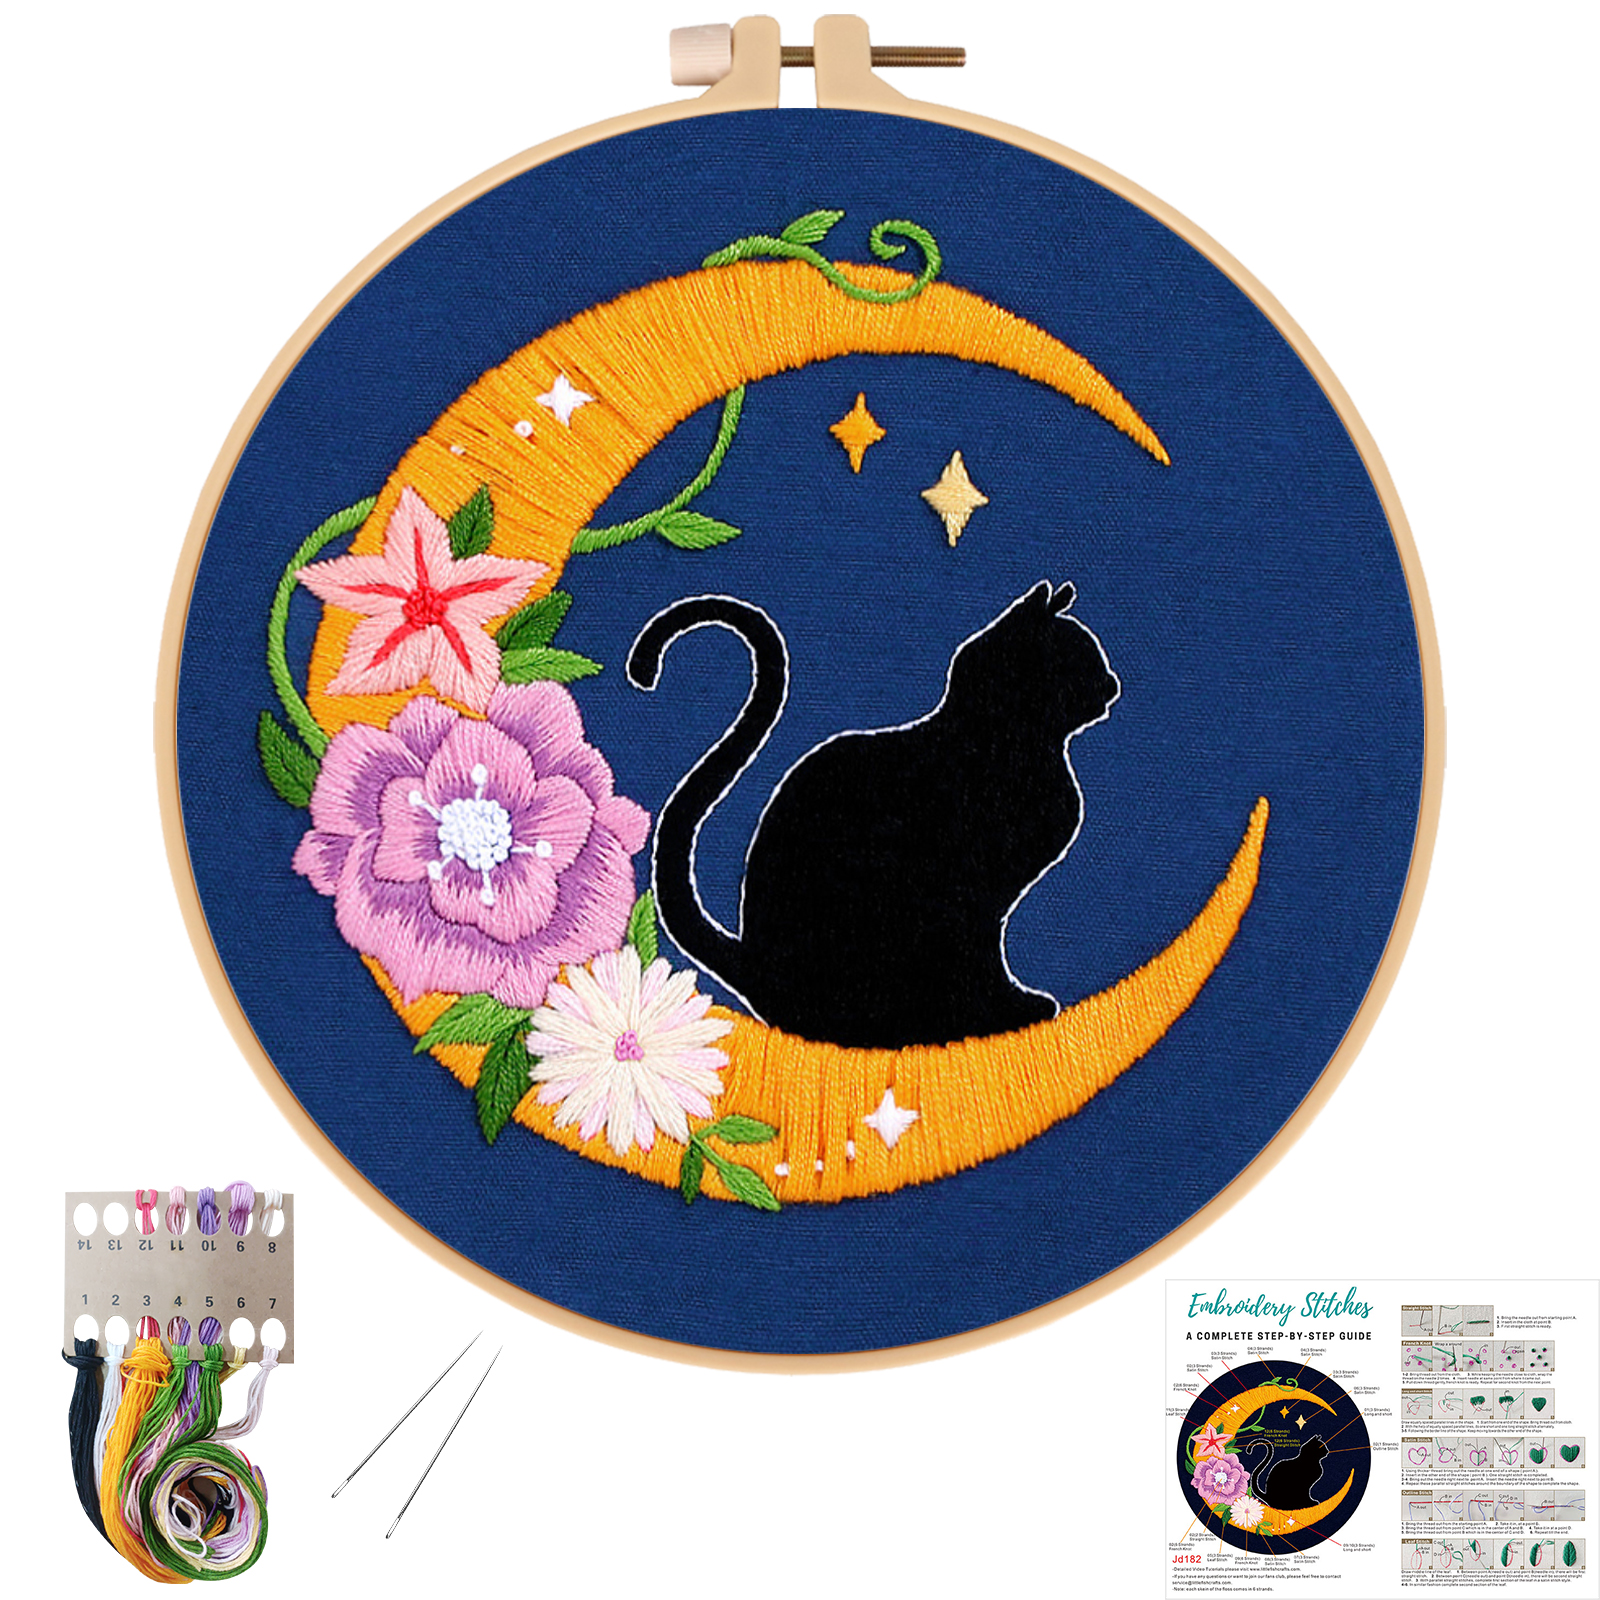 Embroidery Starter Kit Cross stitch kit for Adult Beginner -Cat Moon with floral pattern